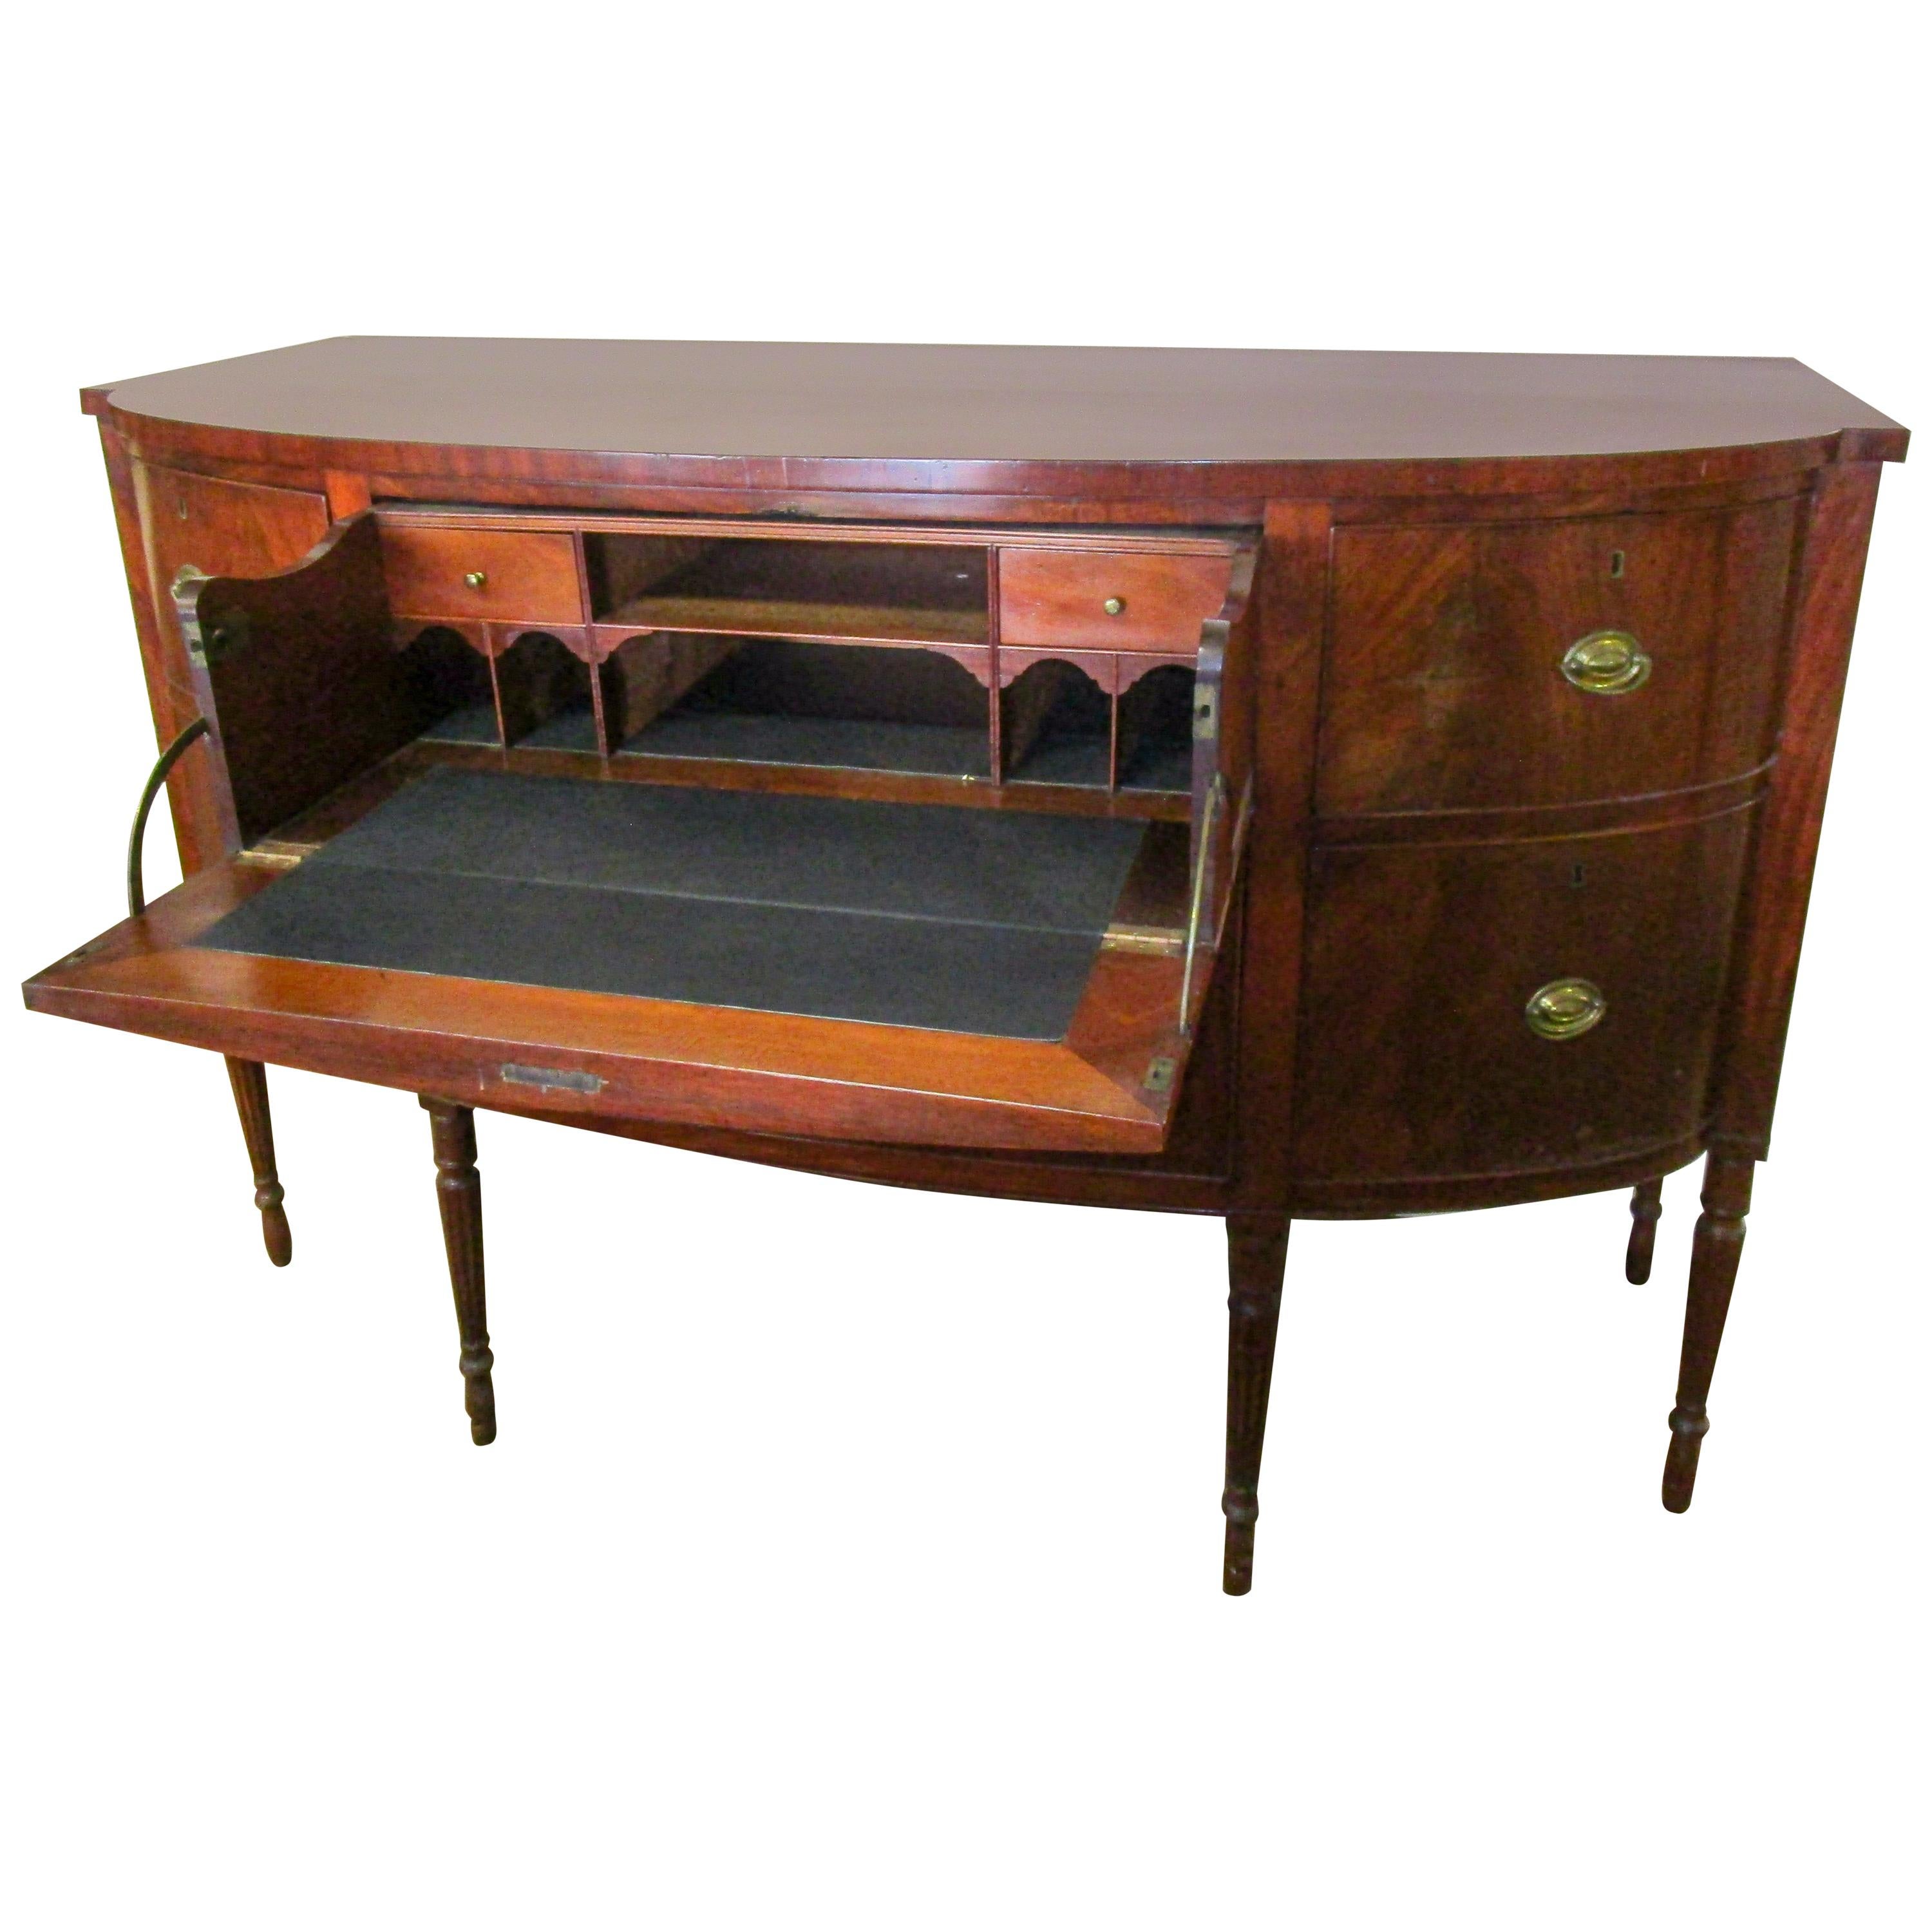 Early 19th Century Sheraton Style American Bowfront Sideboard with Dropdown Desk